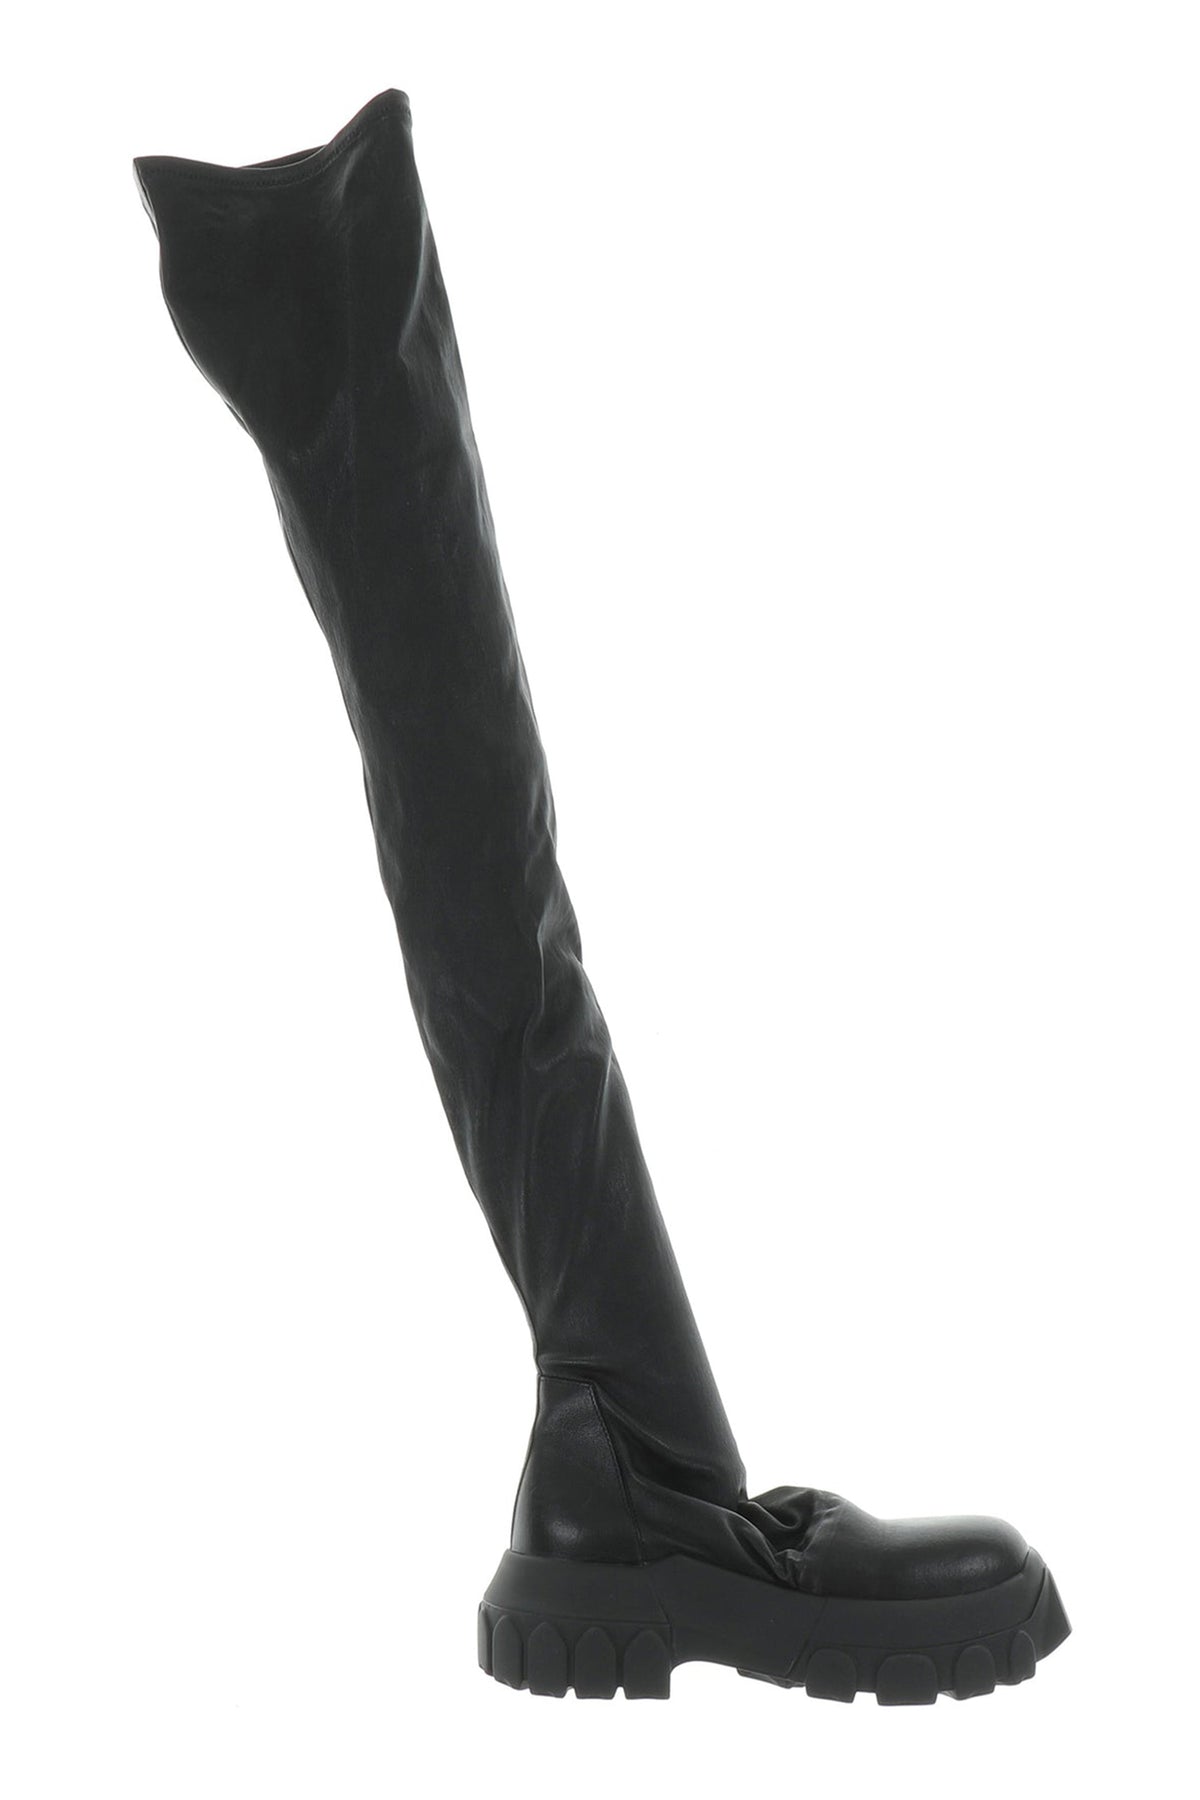 KNEE HIGH STOCKING TRACTOR / BLK